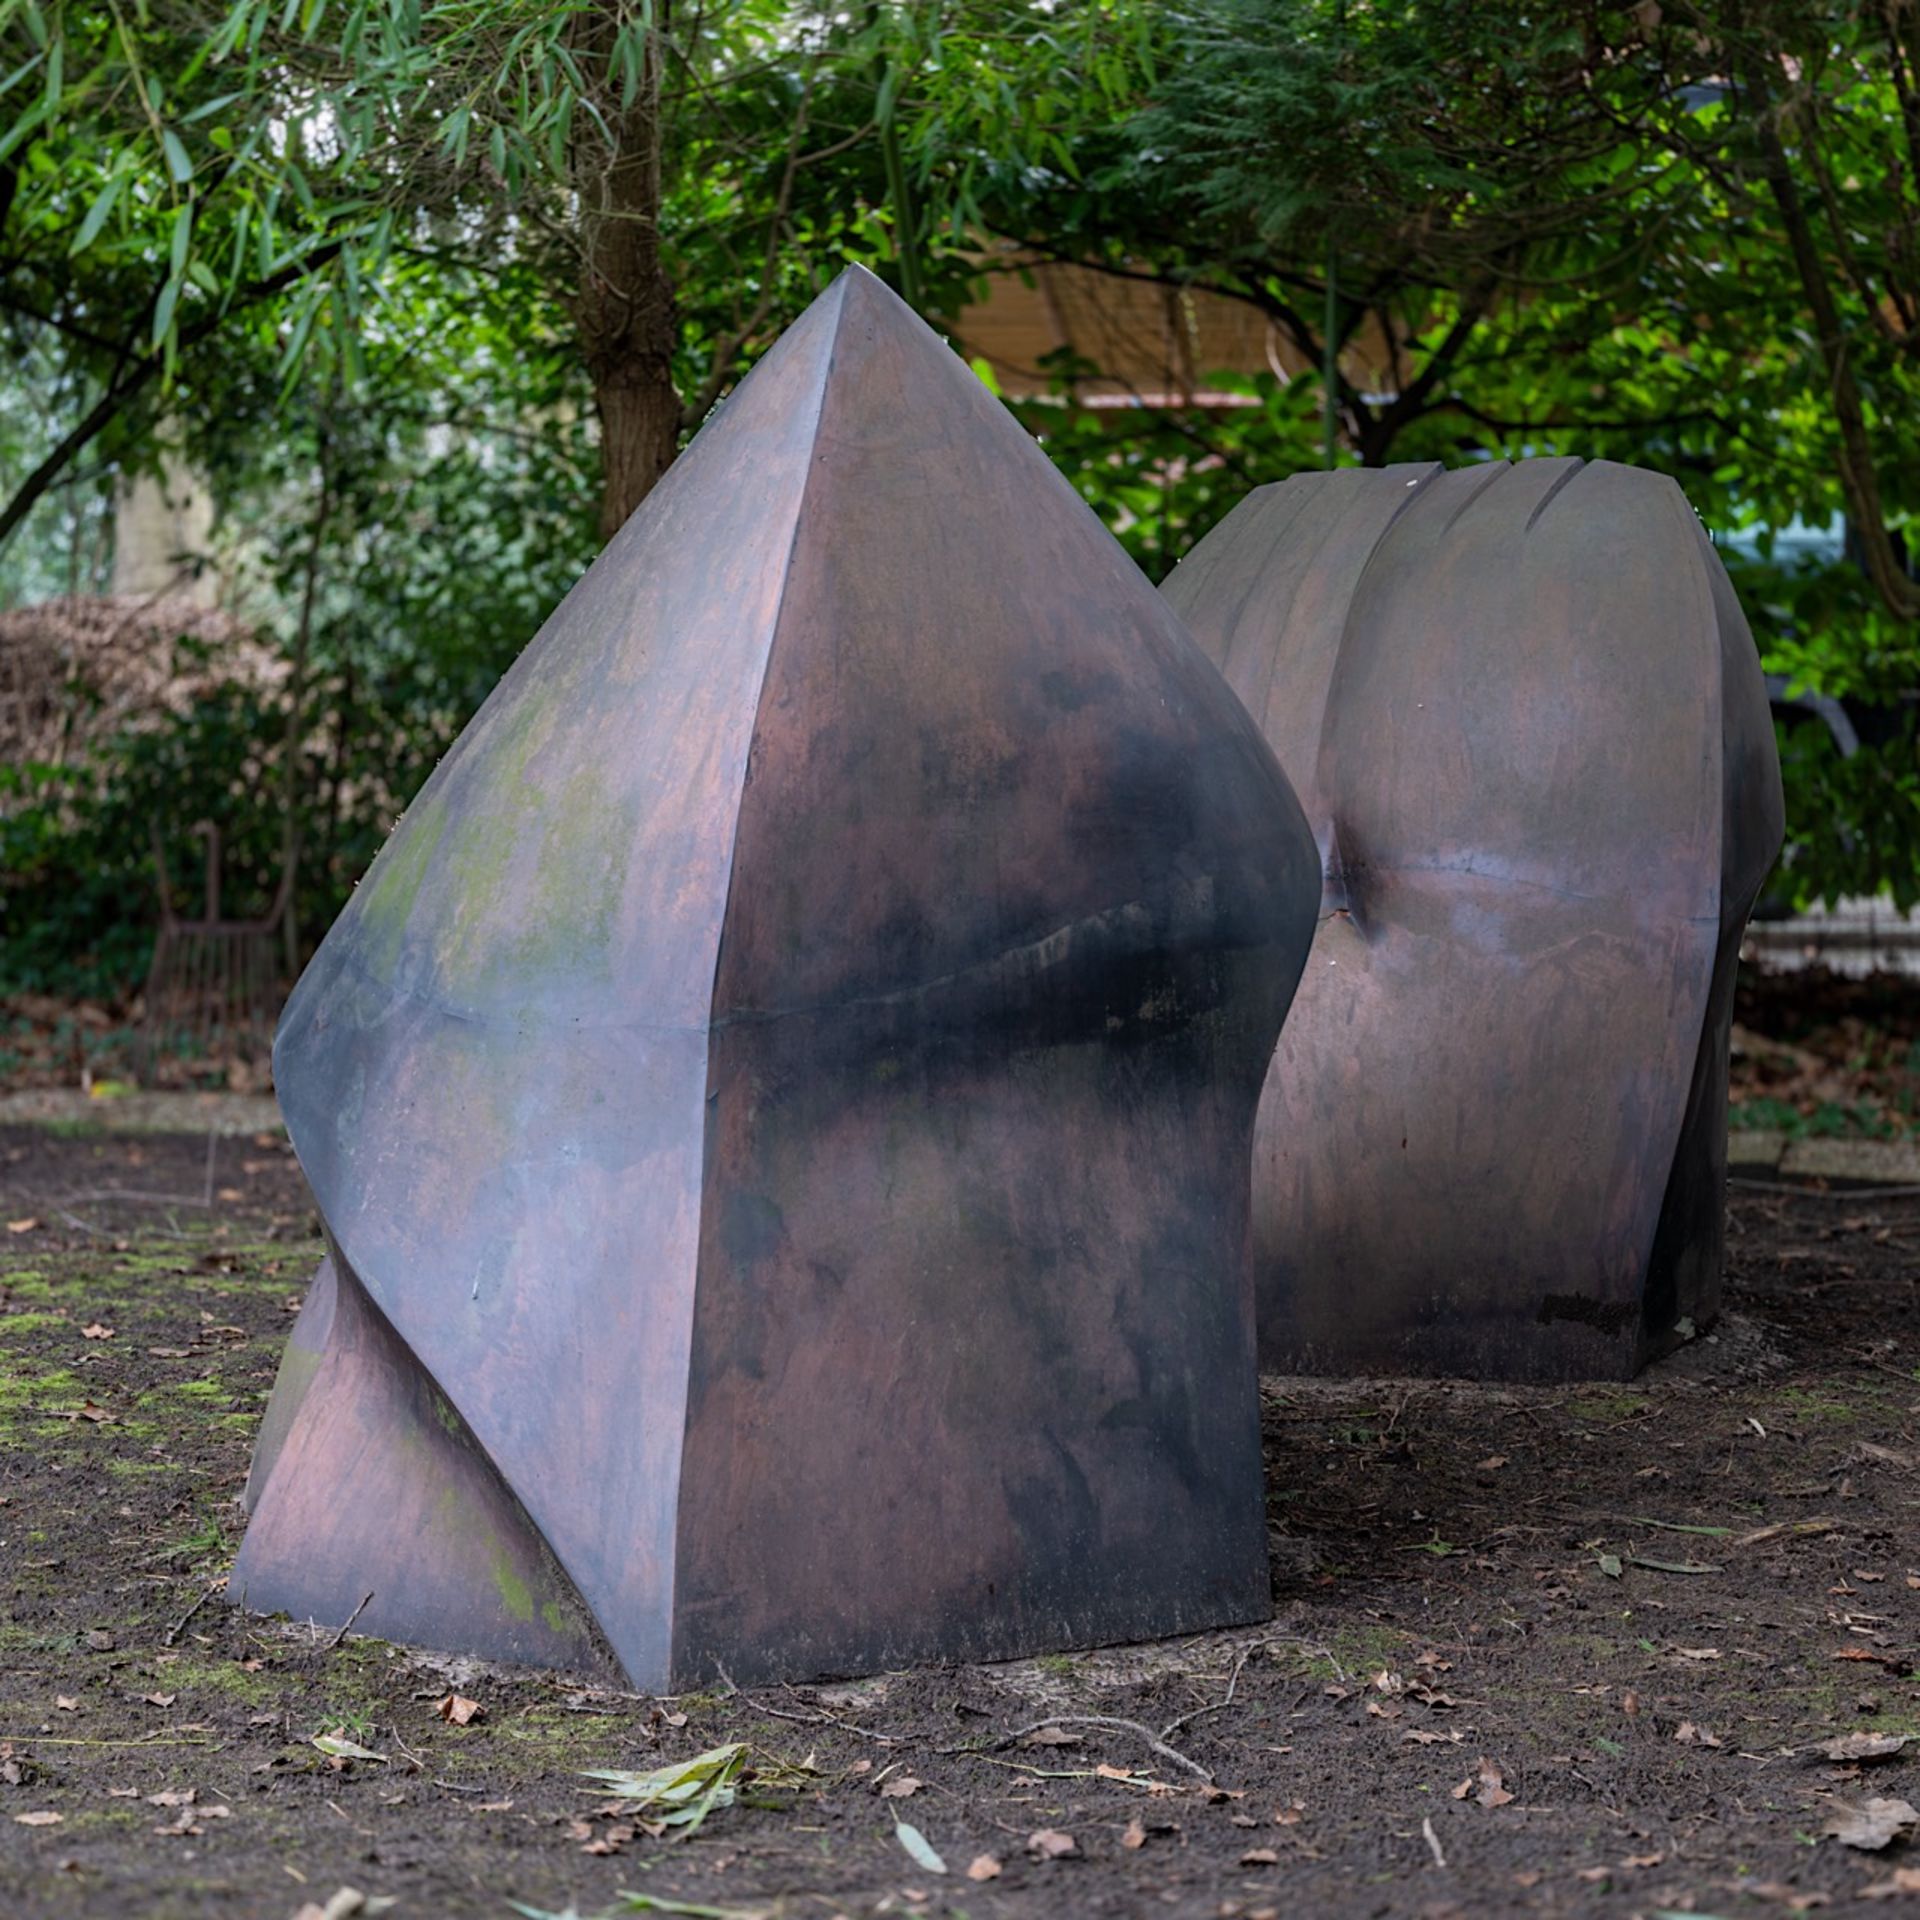 Pol Spilliaert (1935-2023), 'Herinnering', bronze patinated polyester, 1991-1993 - Image 7 of 8